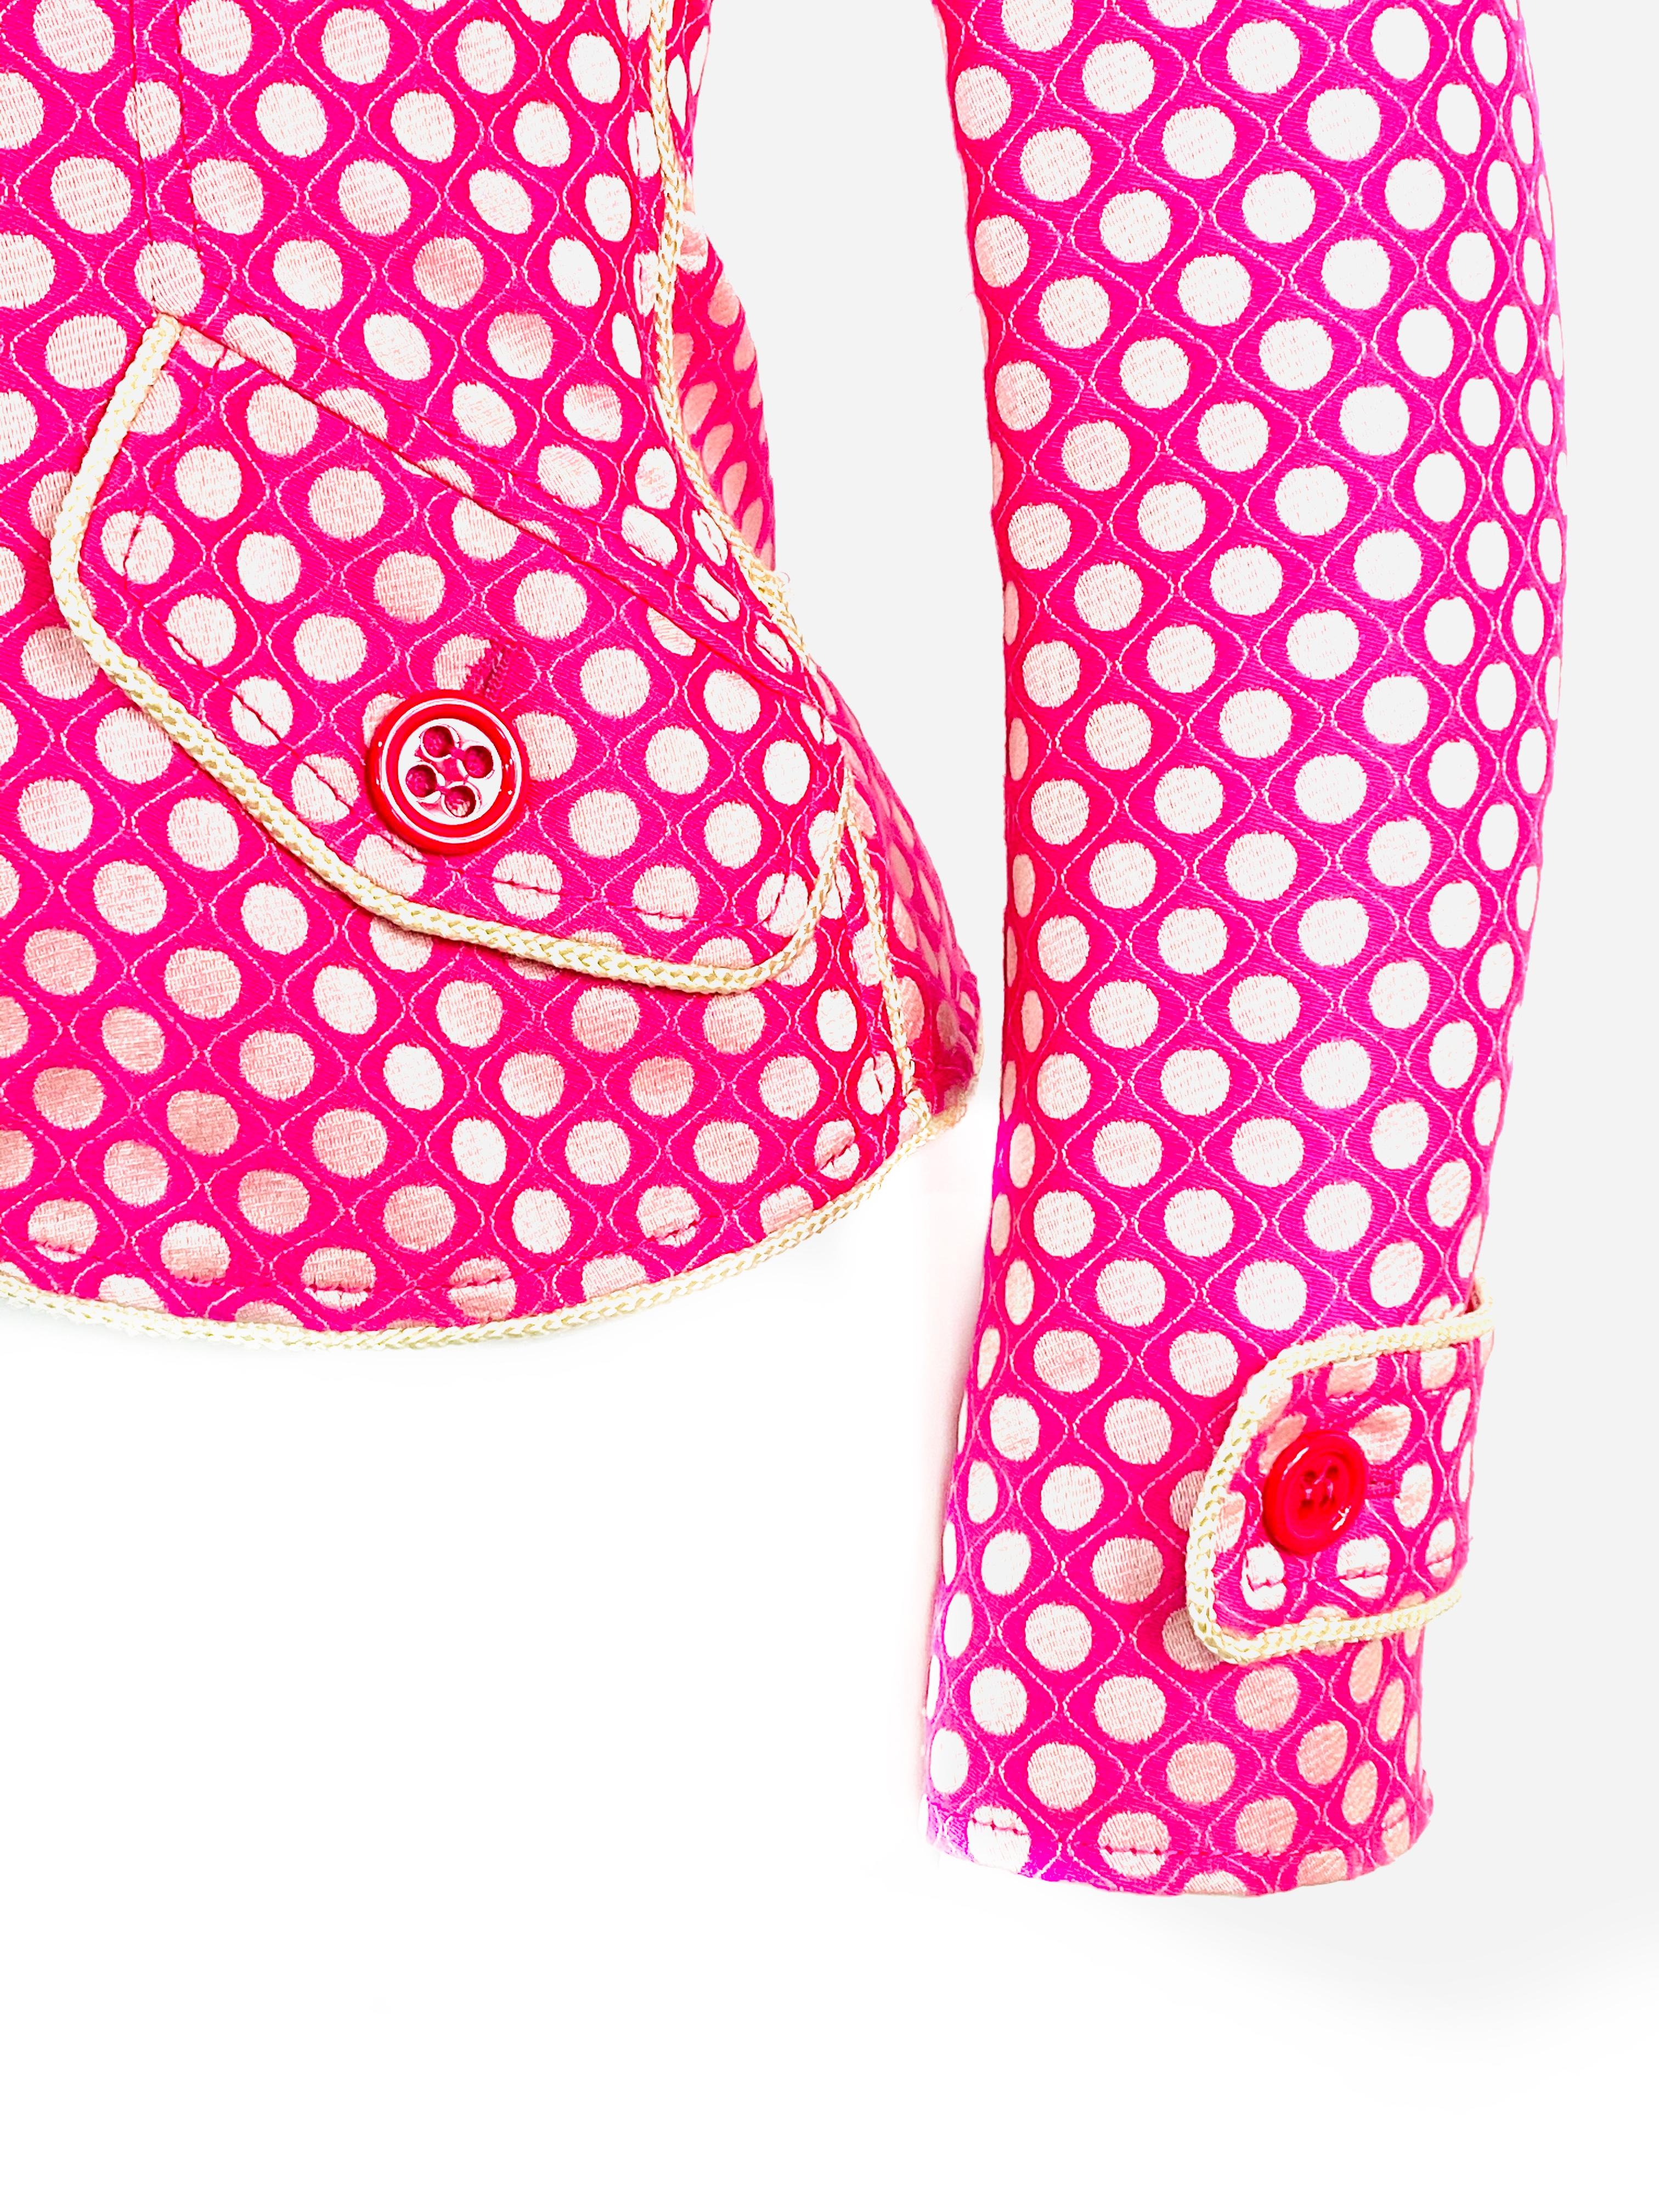 MOSCHINO Cheap and Chic Pink Polka Dot Blazer Jacket w/ Buttons Size 8

Product detail:
Size US 8
Hot pink color w/ polka dot print
Featuring 2 pockets on each side w/ buttons
Three buttons front closure
Featuring one button on the bottom of each